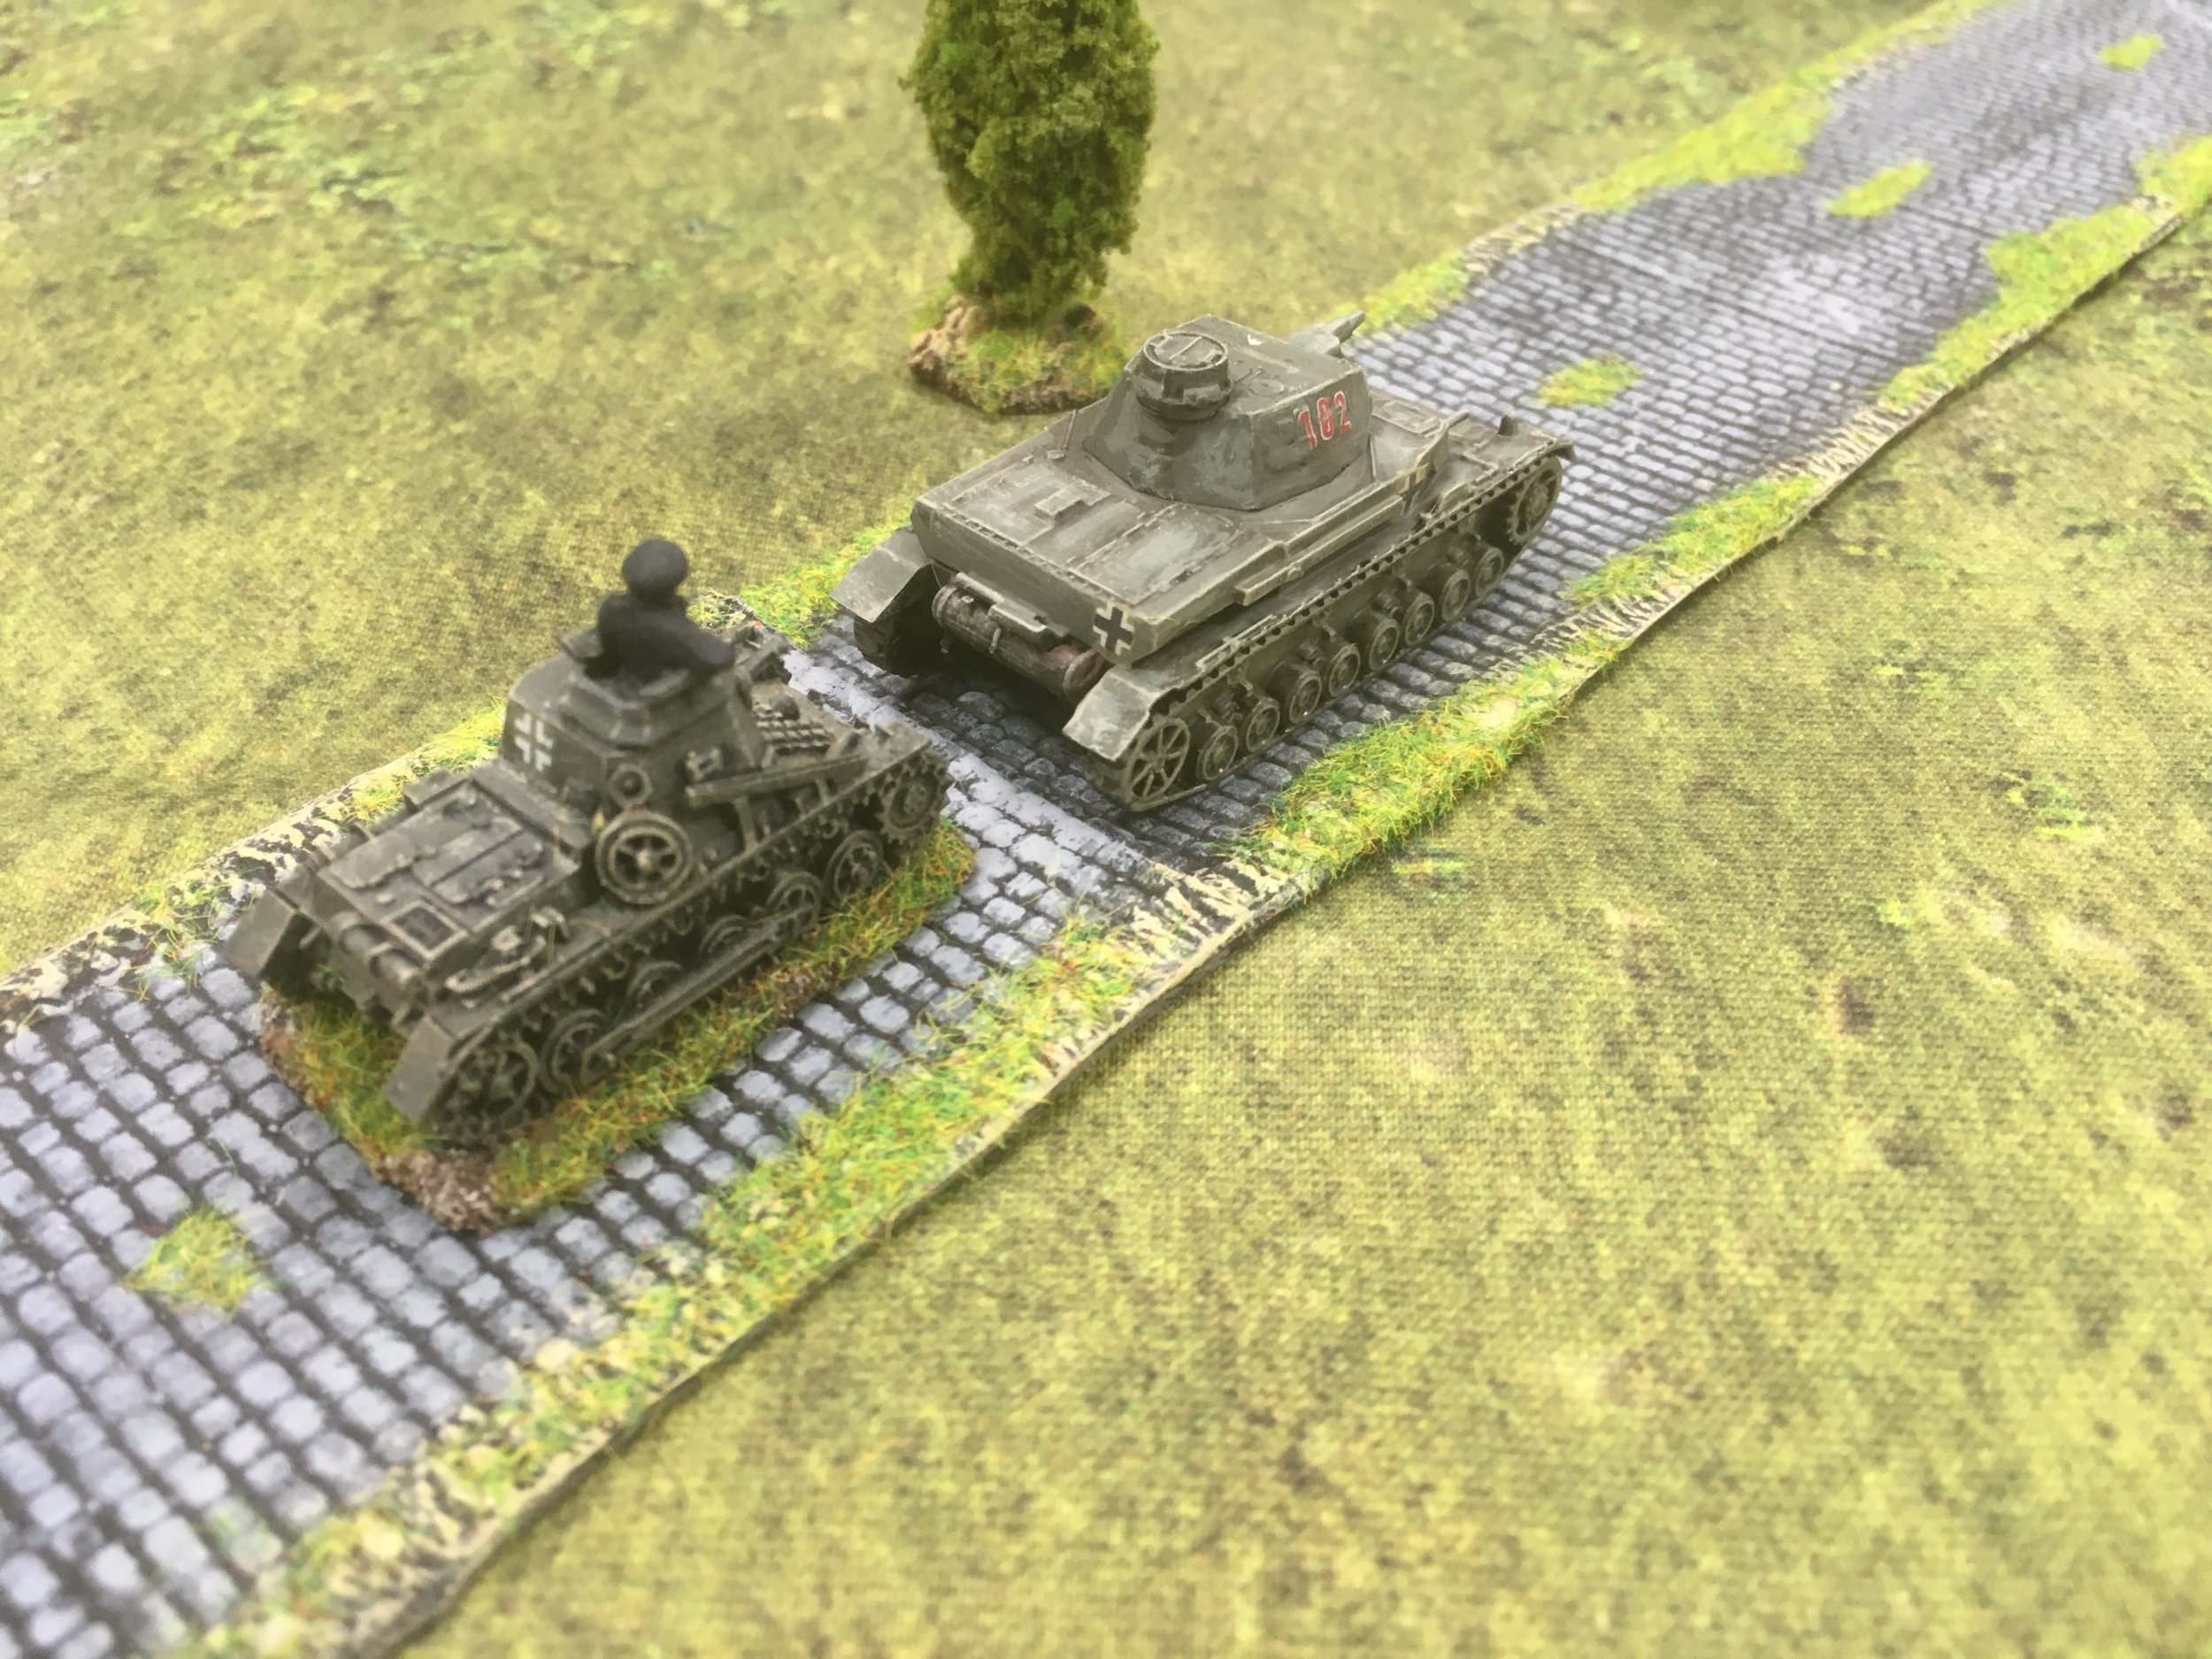 Hold on Kammeraden! The company HQ arrives with a support PZ IV D. This will sort the Frenchies out...